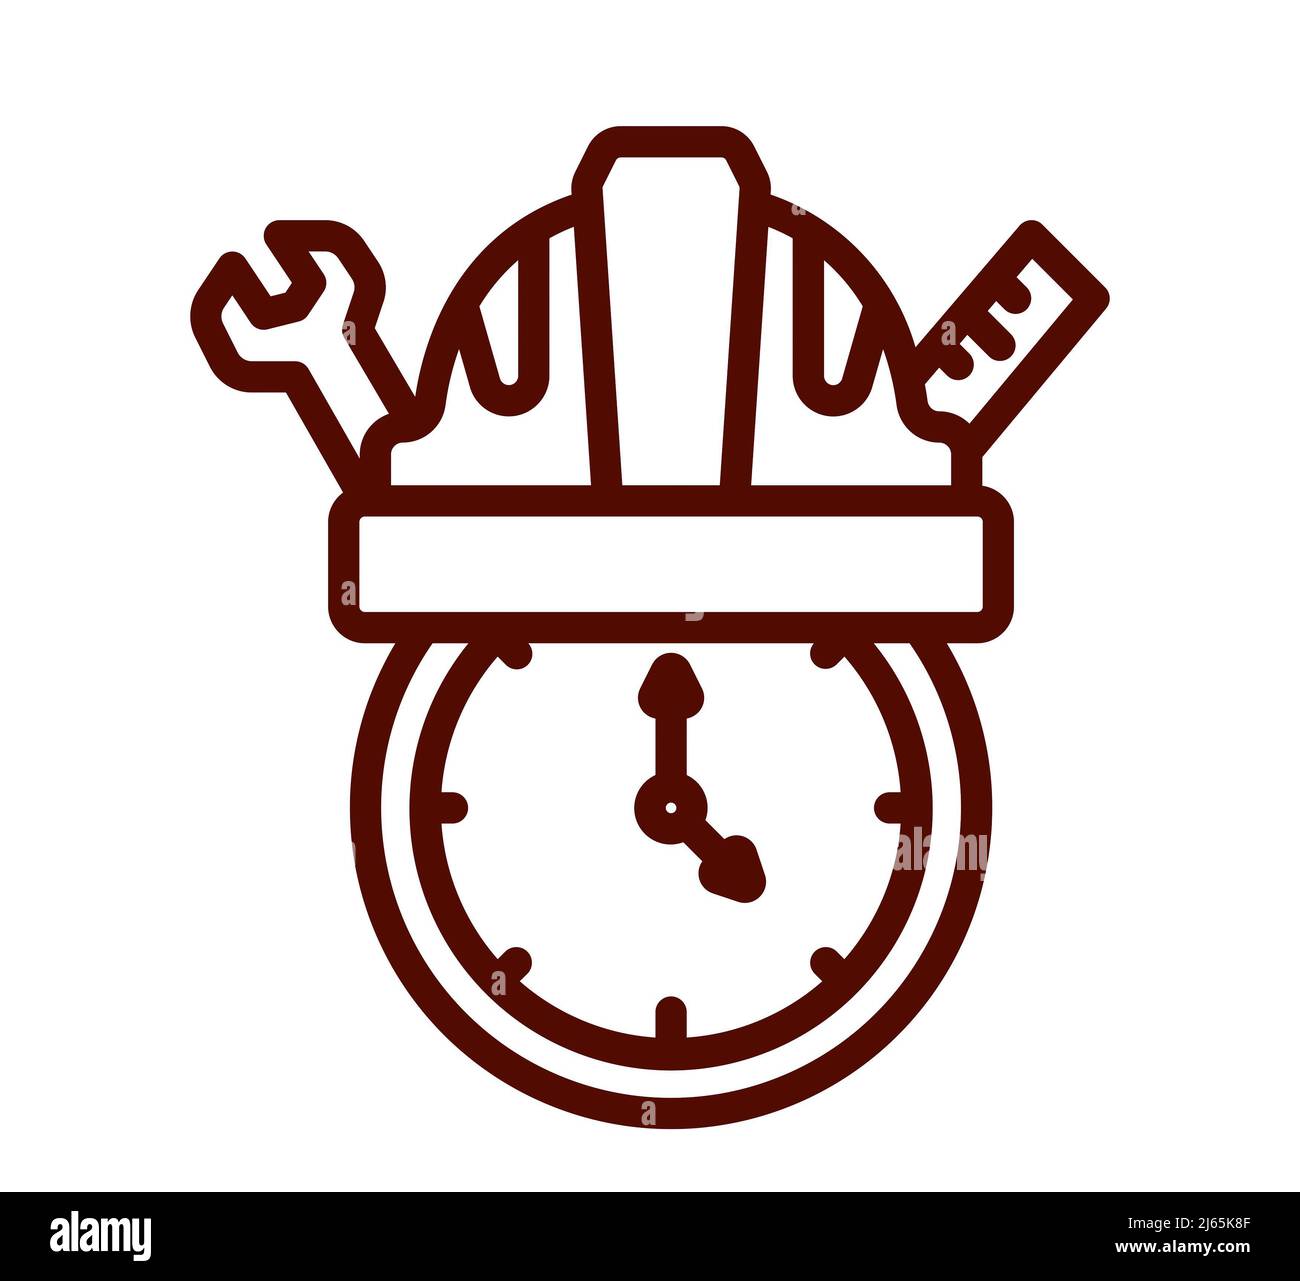 international workers day has a helmet with a clock and wrench illustration of labors day of banner poster Stock Photo